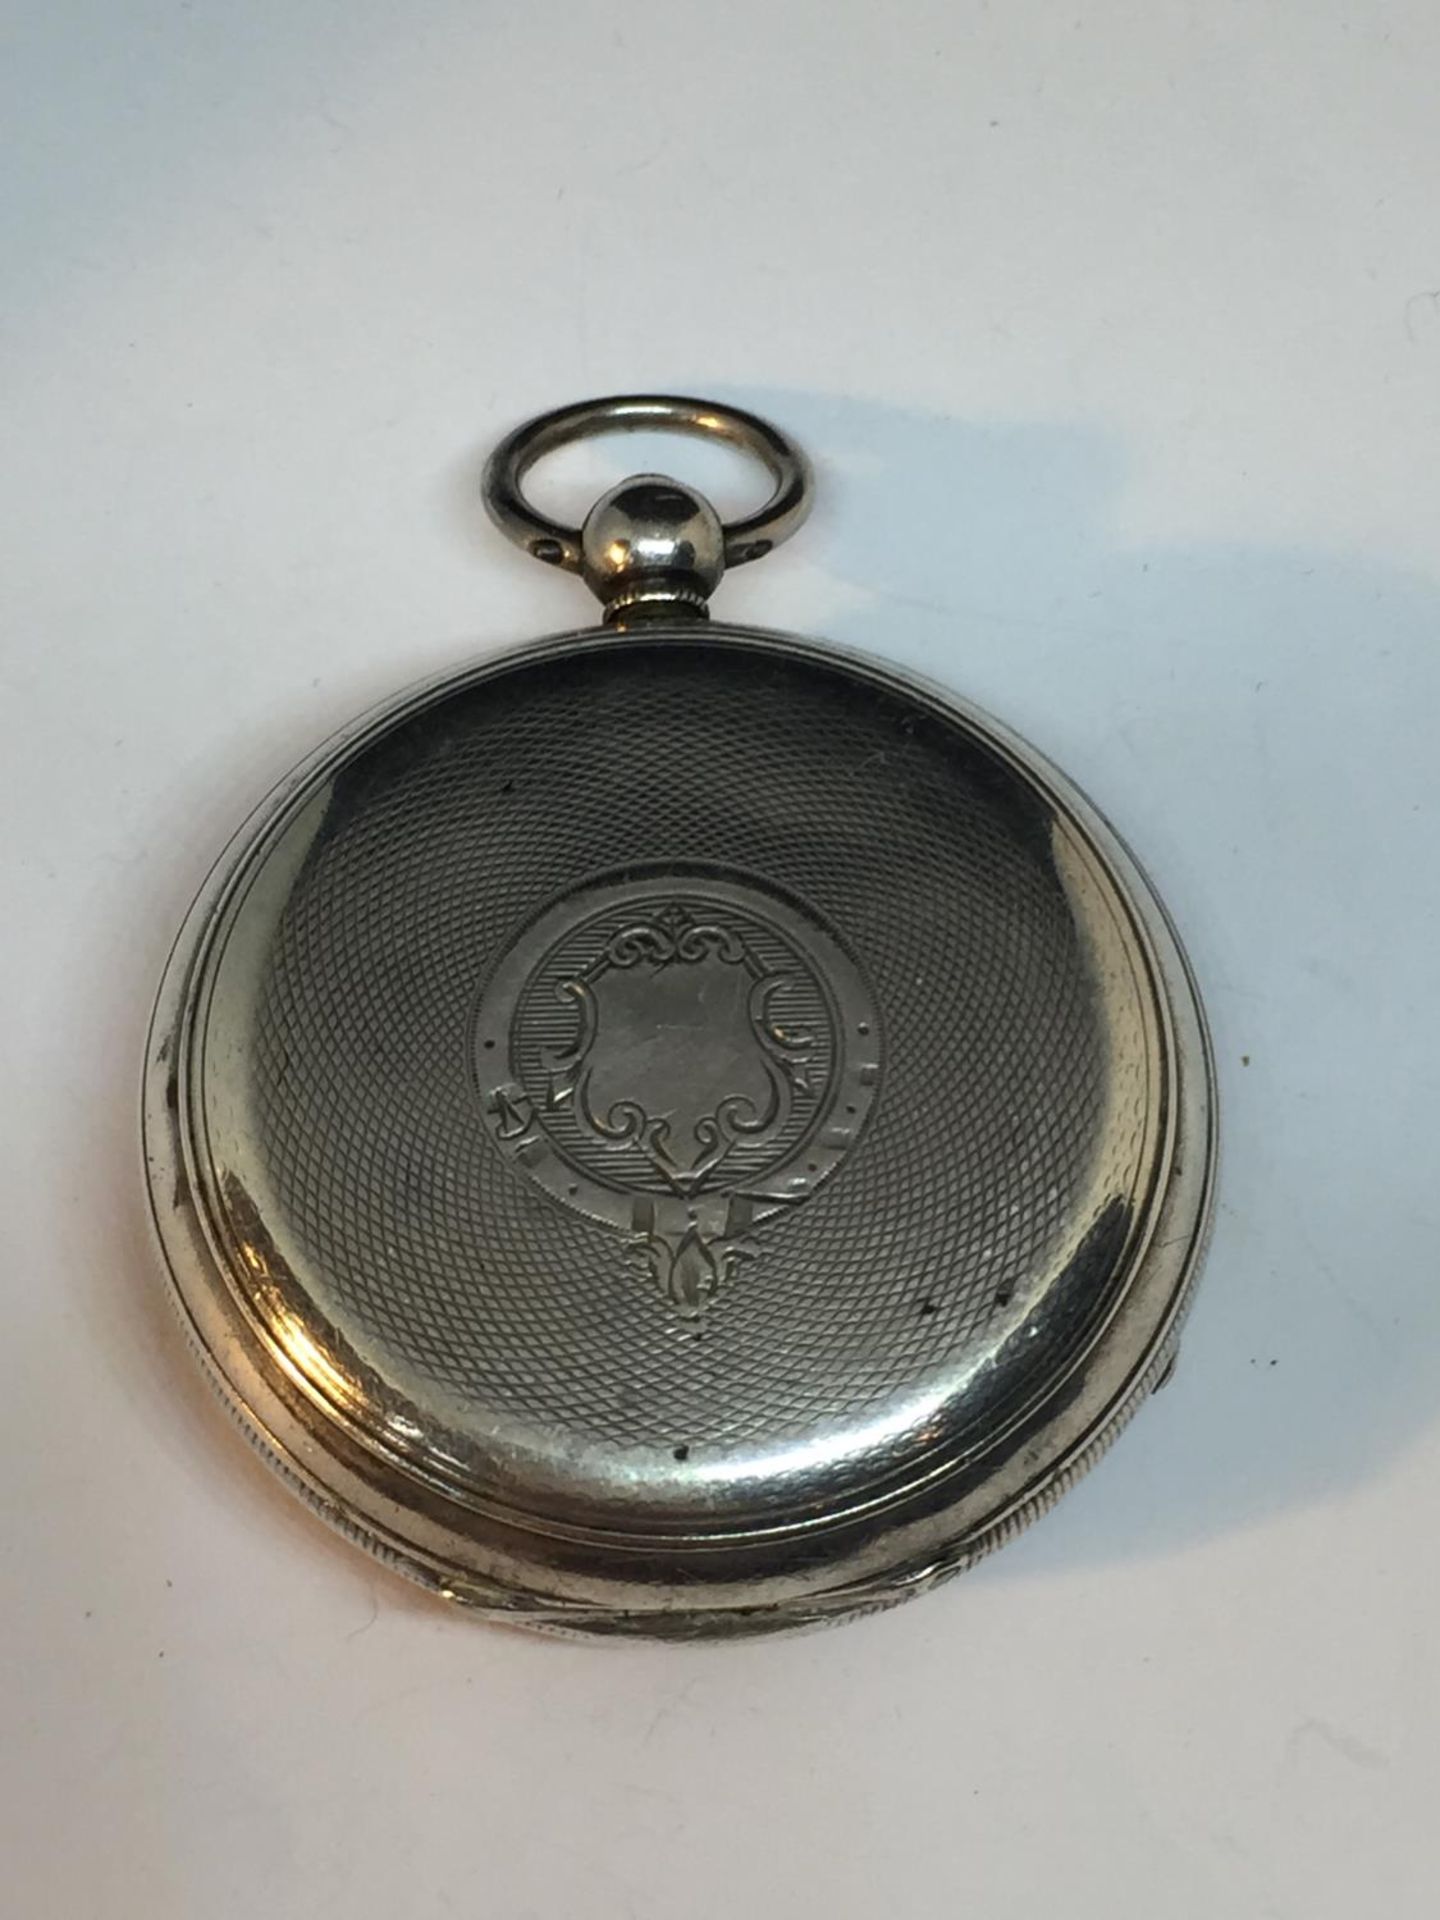 A HALLMARKED LONDON SILVER POCKET WATCH - Image 2 of 3